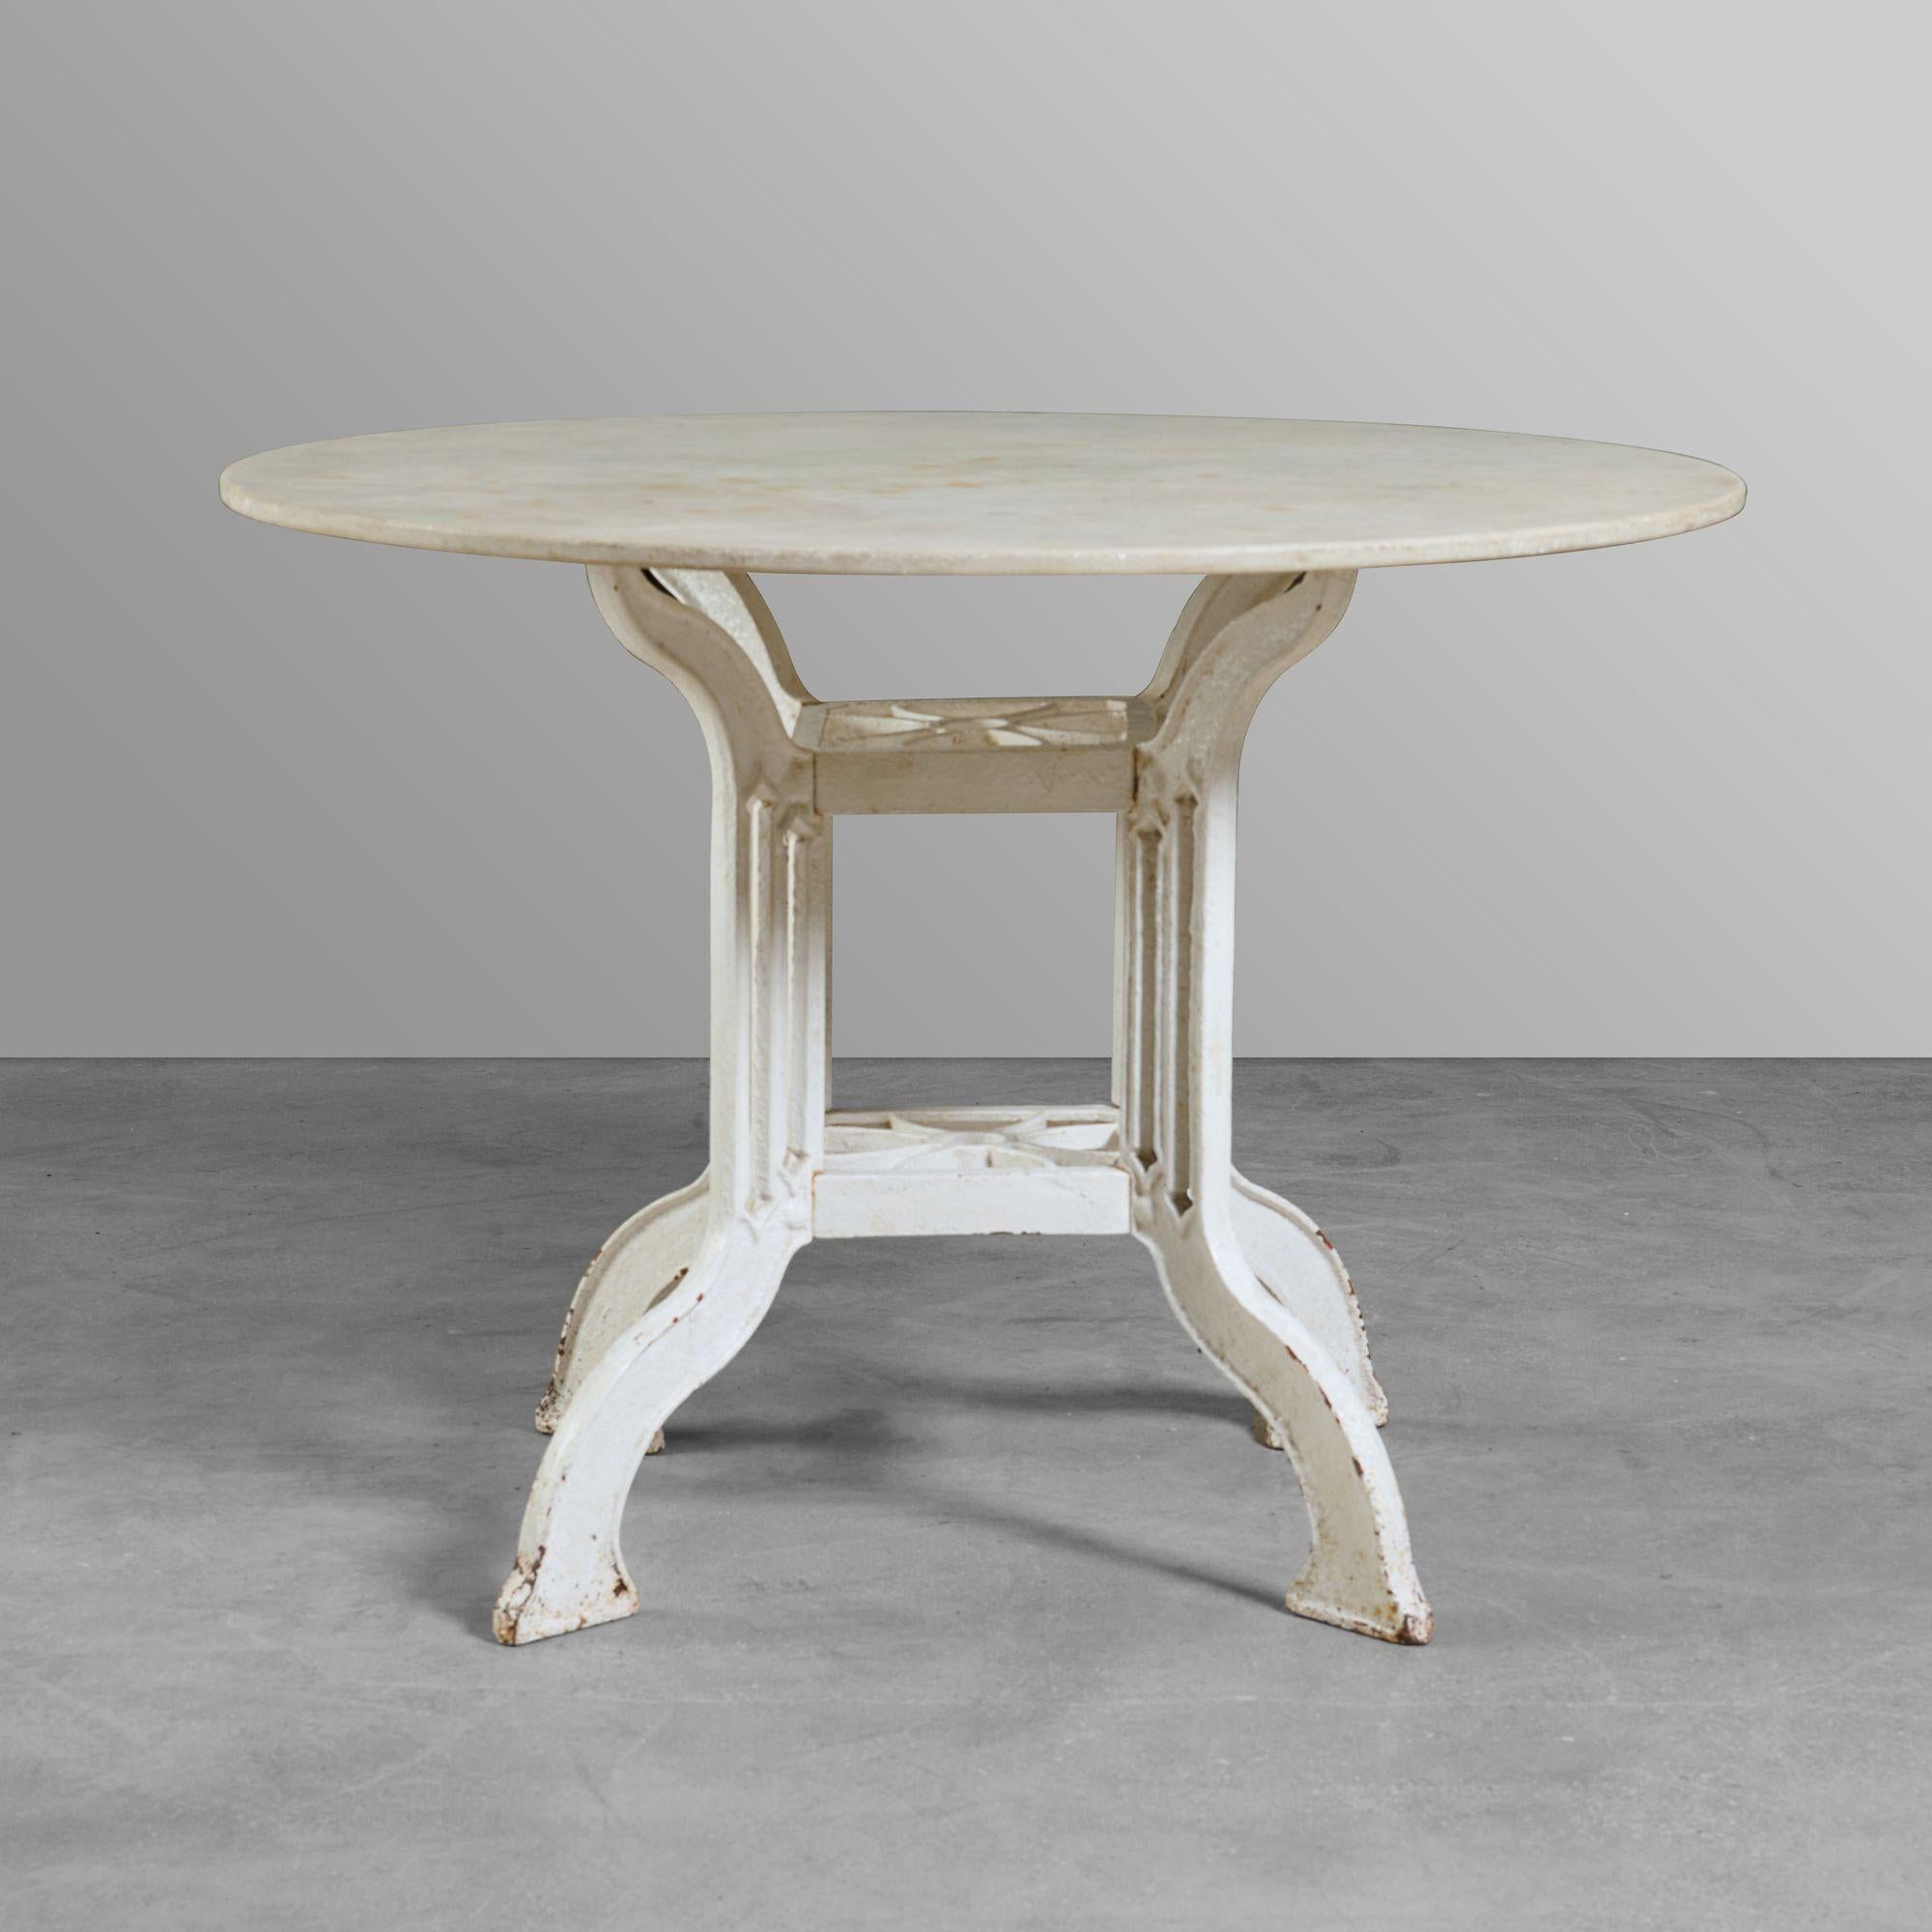 Decoratie cast iron garden table. Base with original marble top. Great design and patina.